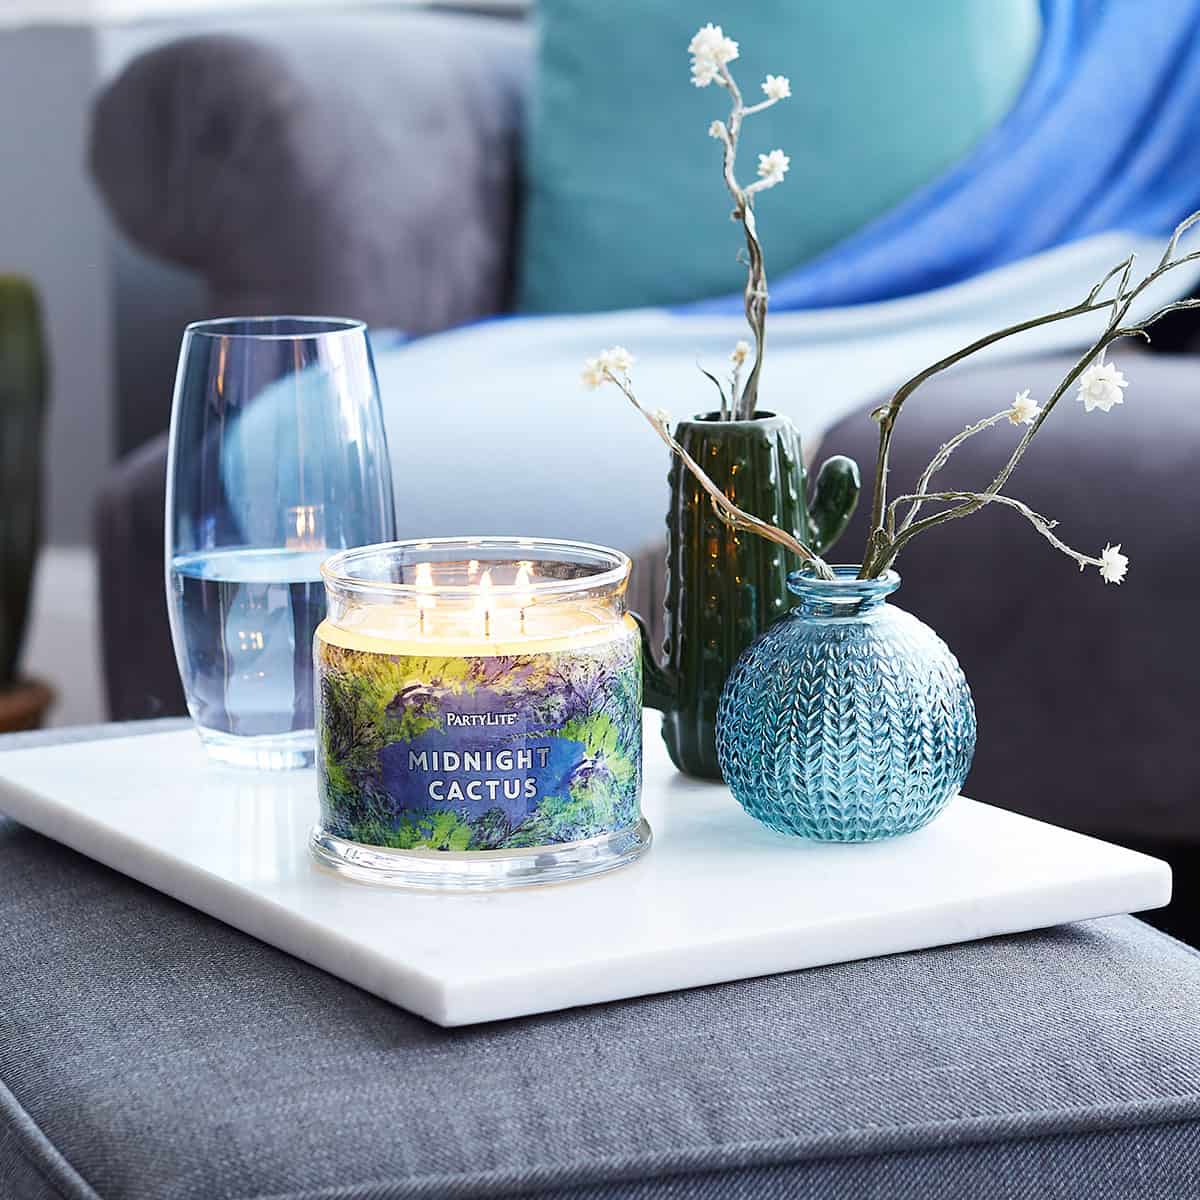 Midnight Cactus 3-wick Jar Candle - PartyLite US